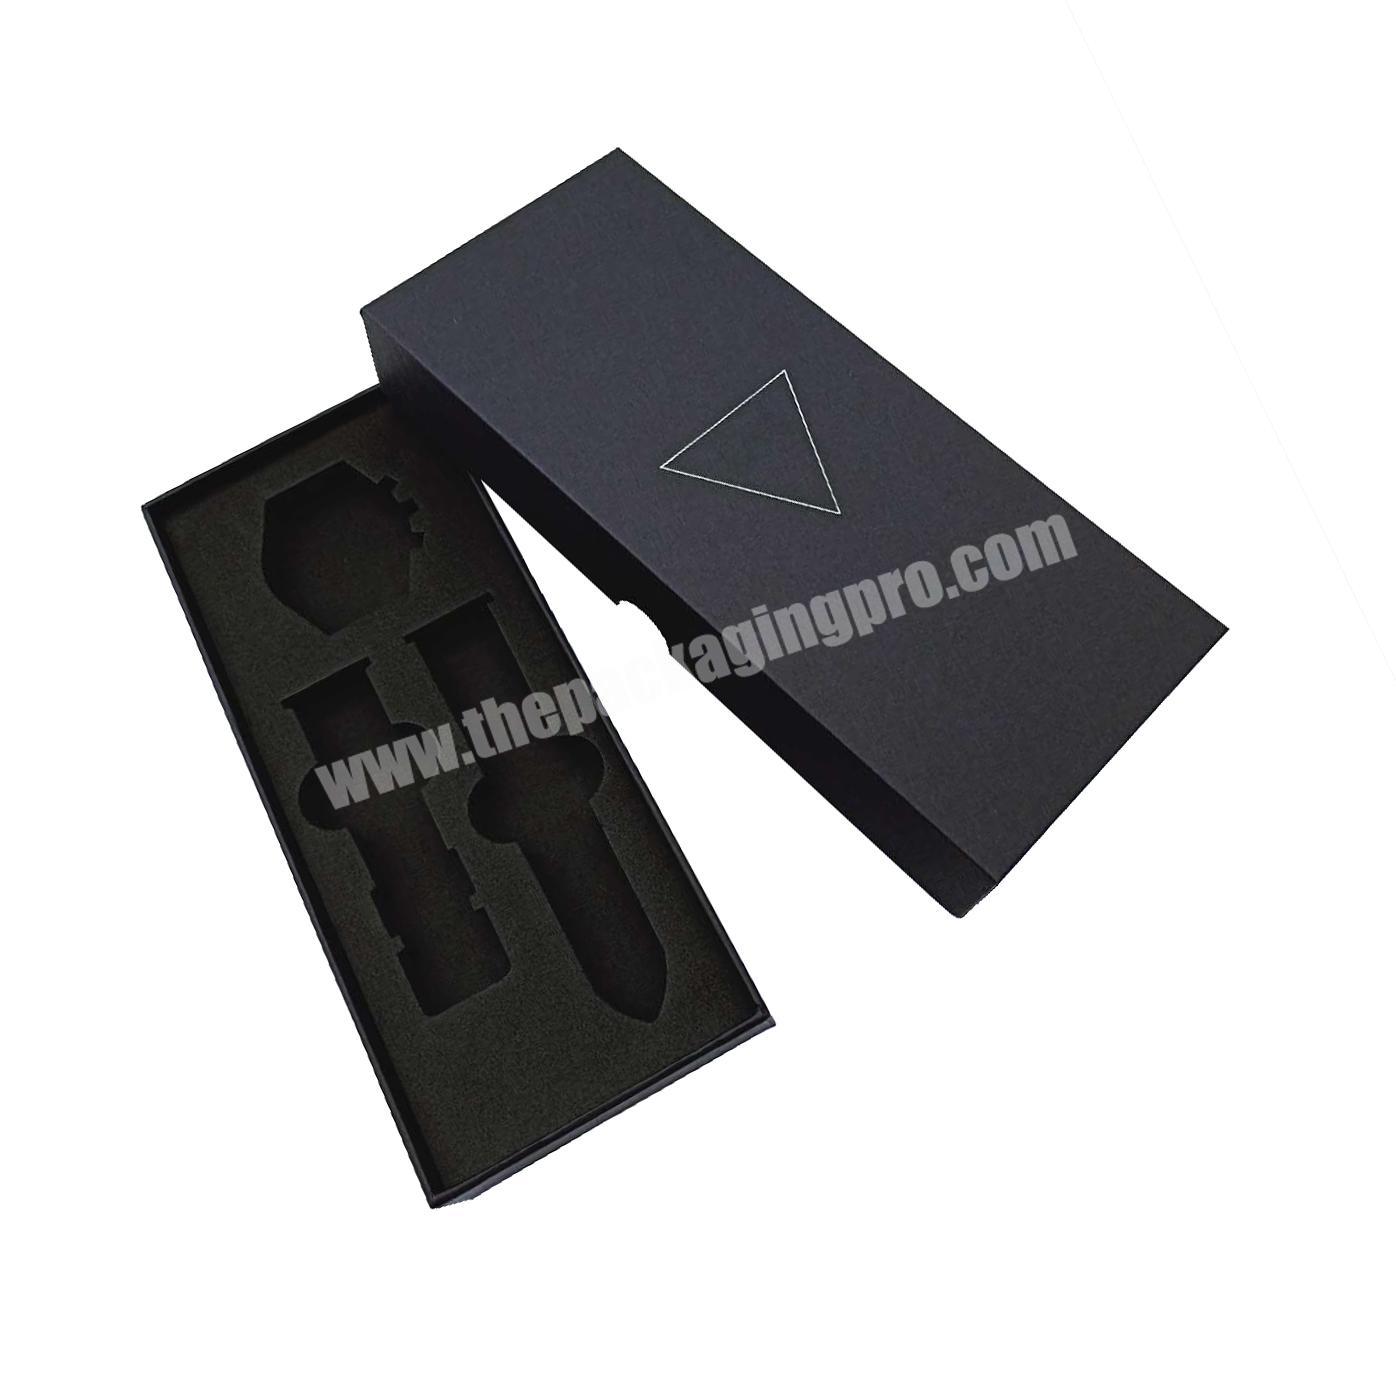 Gift knife and fork packaging box to contain a high quality factory